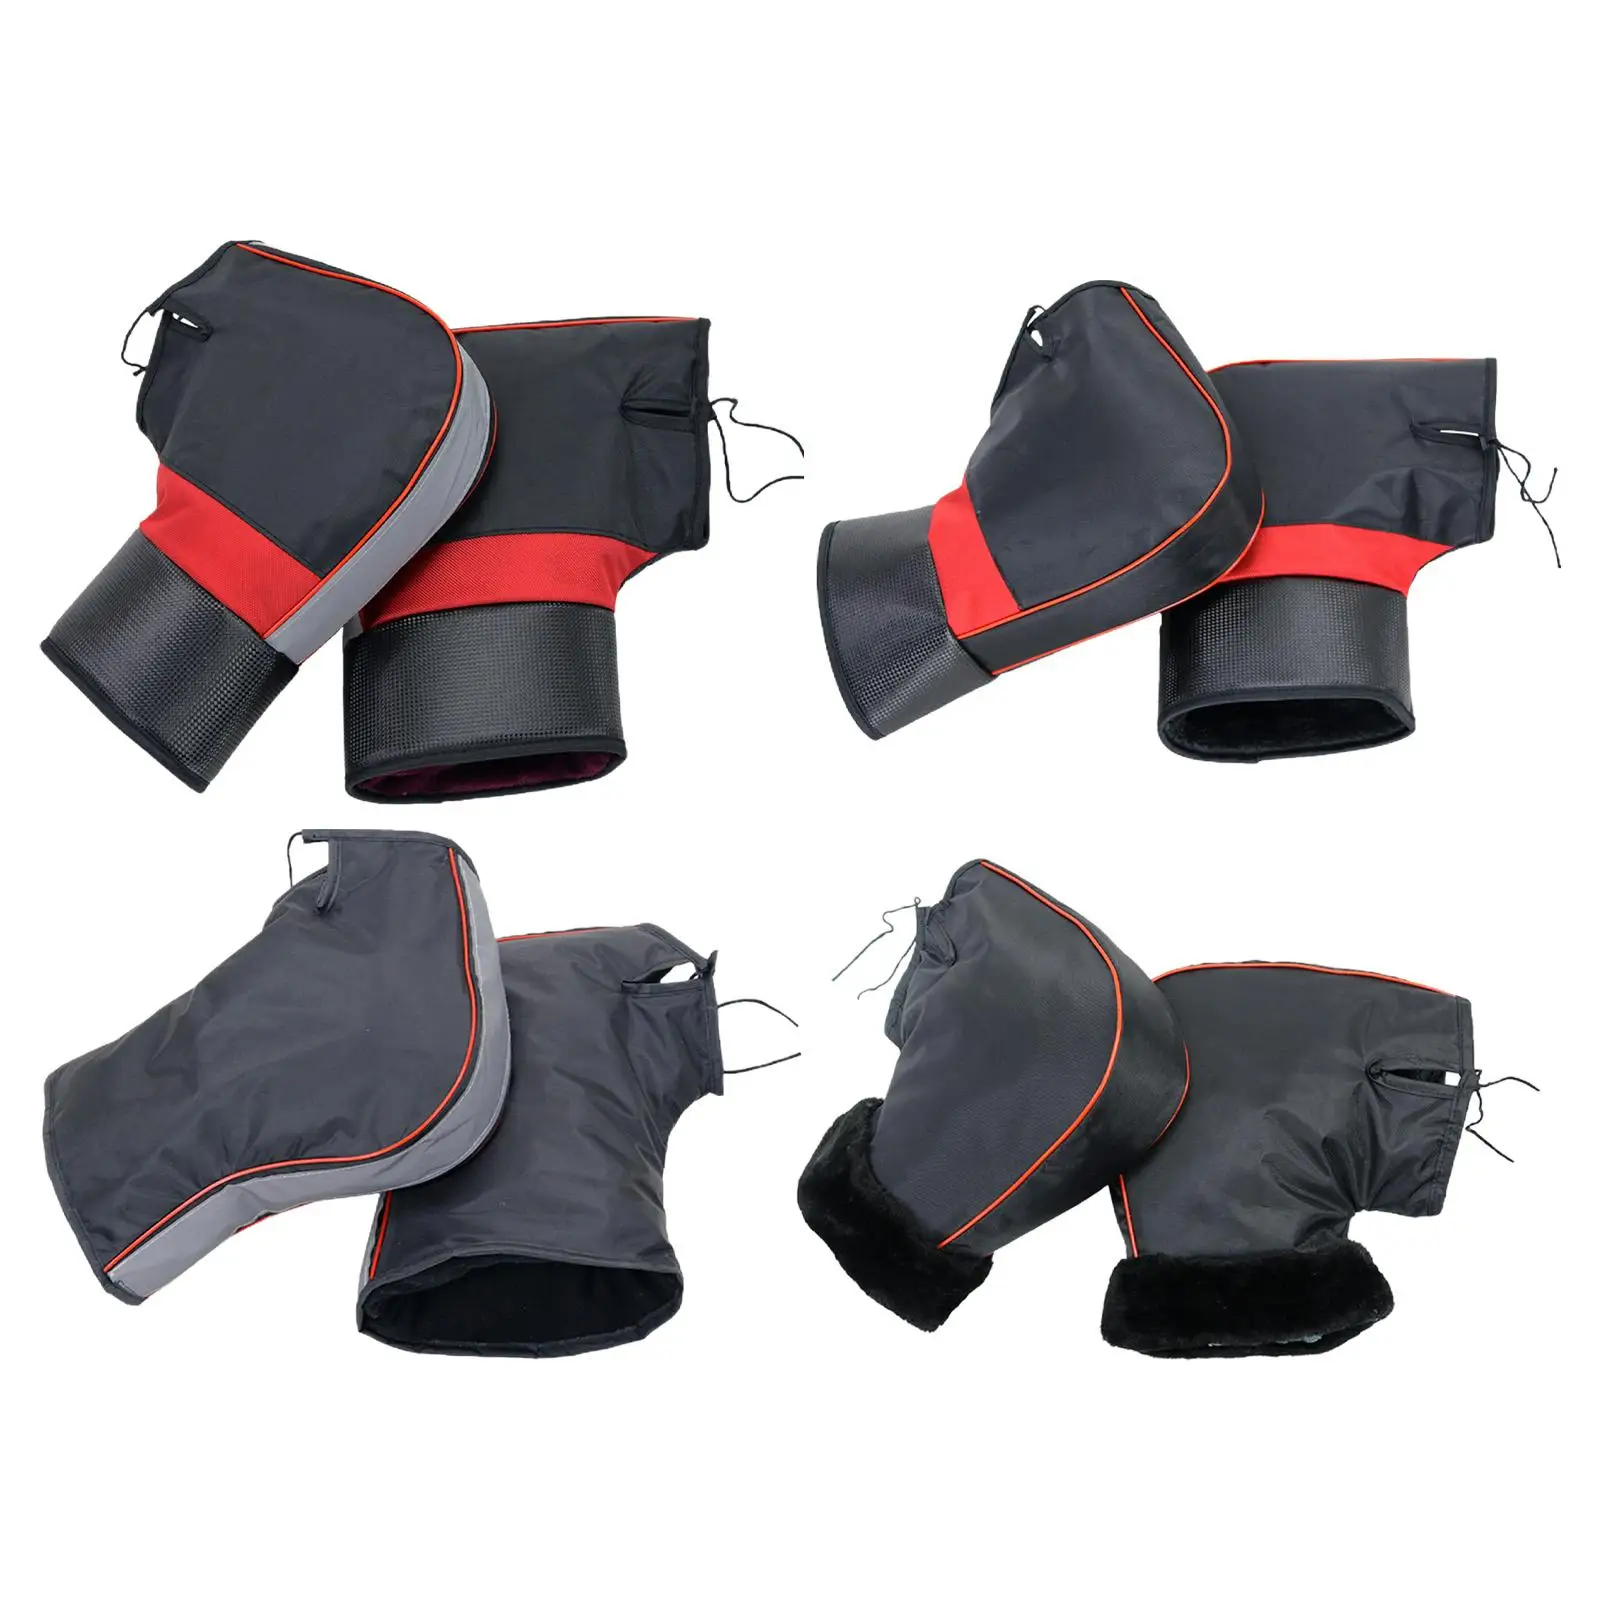 Motorcycle Handlebar Muffs Weather Protection Mittens Covers for Riding